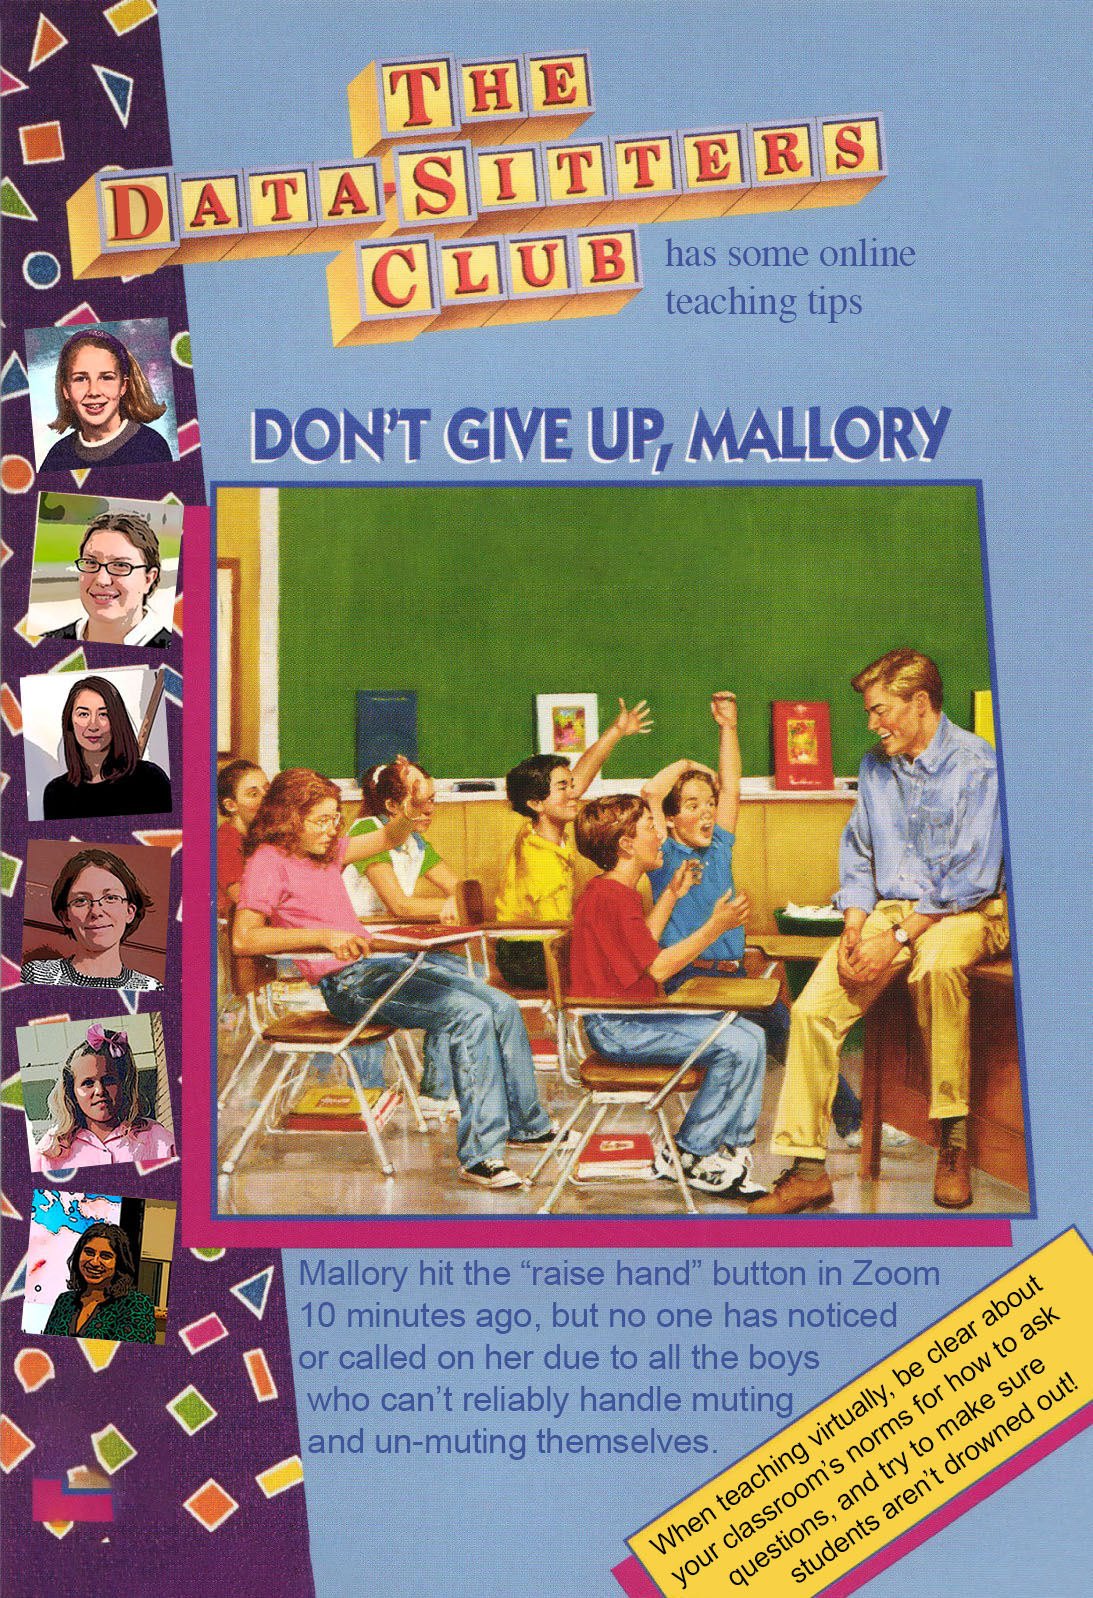 Don't give up, Mallory! Having clear guidelines for asking questions in Zoom classes is important.